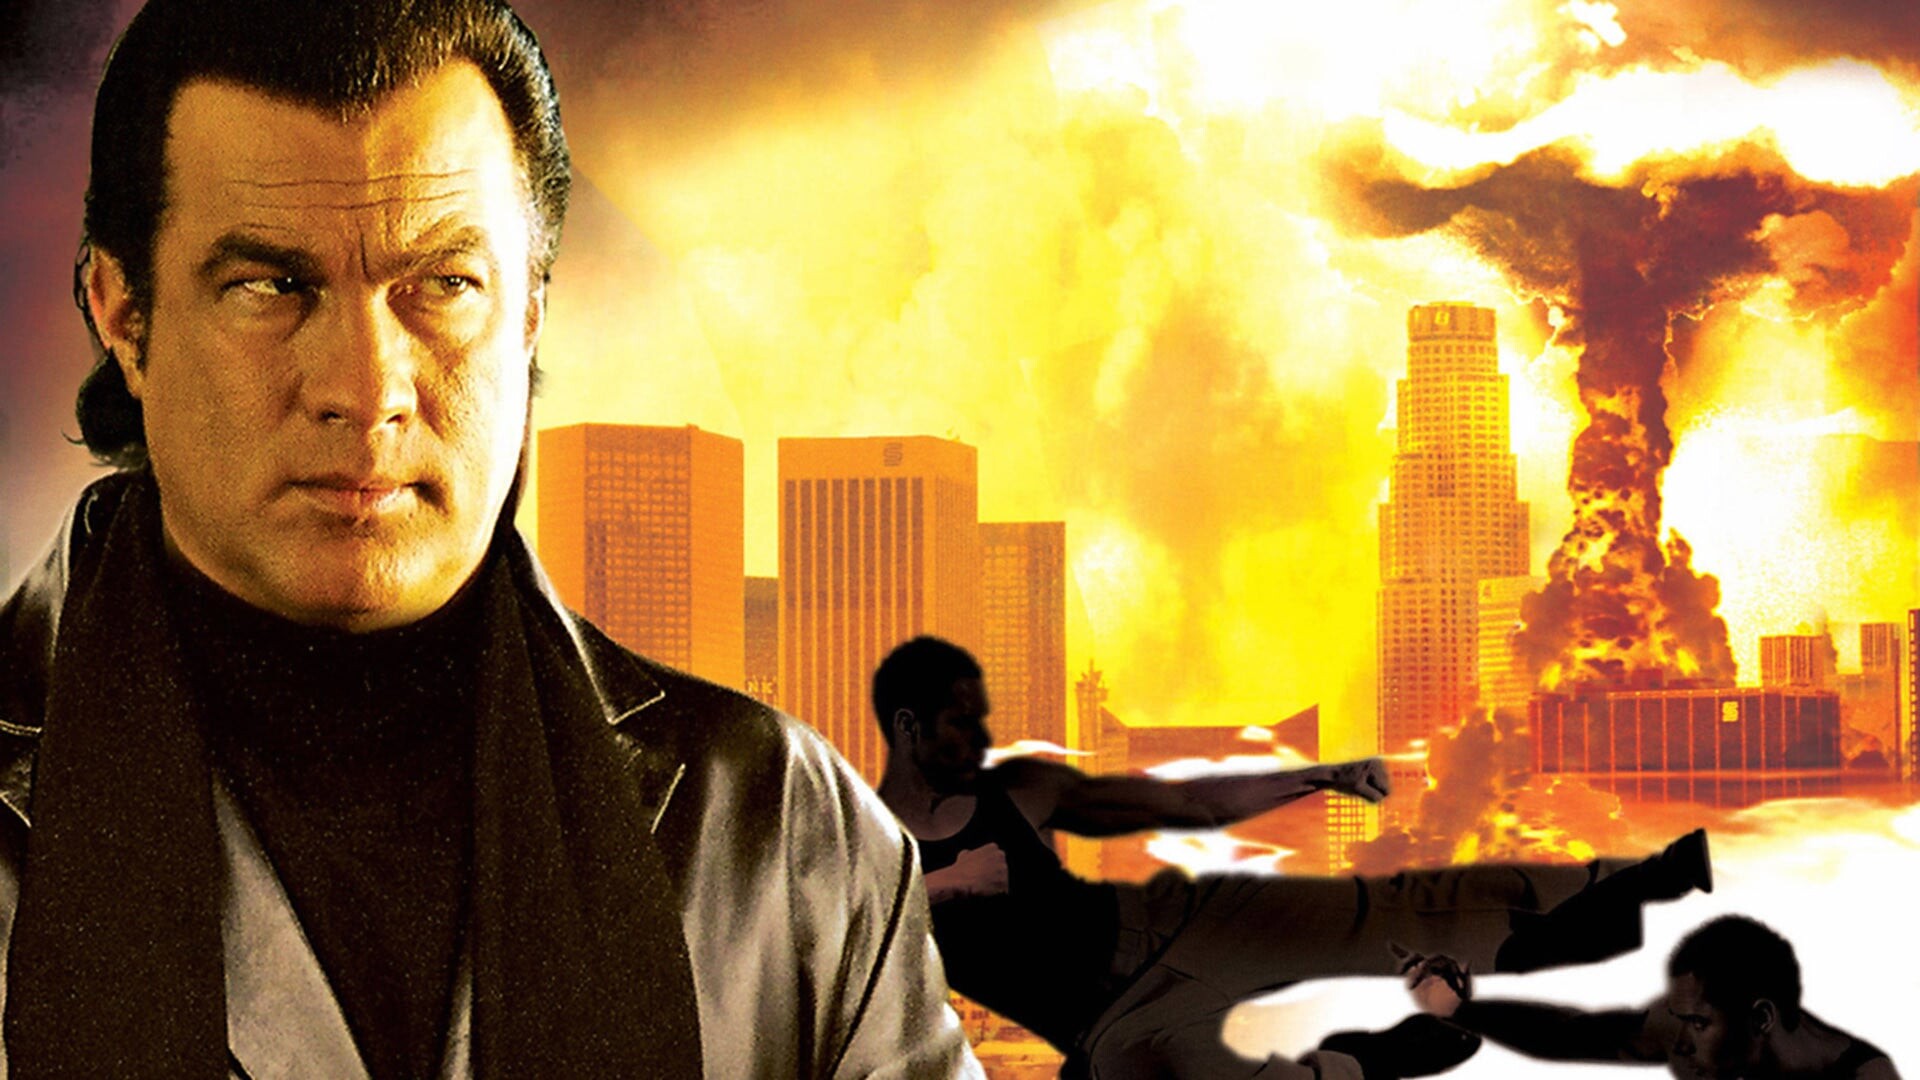 Steven Seagal: Foreigner 2: Black Dawn, A 2005 American action film by Alexander Gruszynski, Jonathan Cold, A former-CIA agent. 1920x1080 Full HD Background.